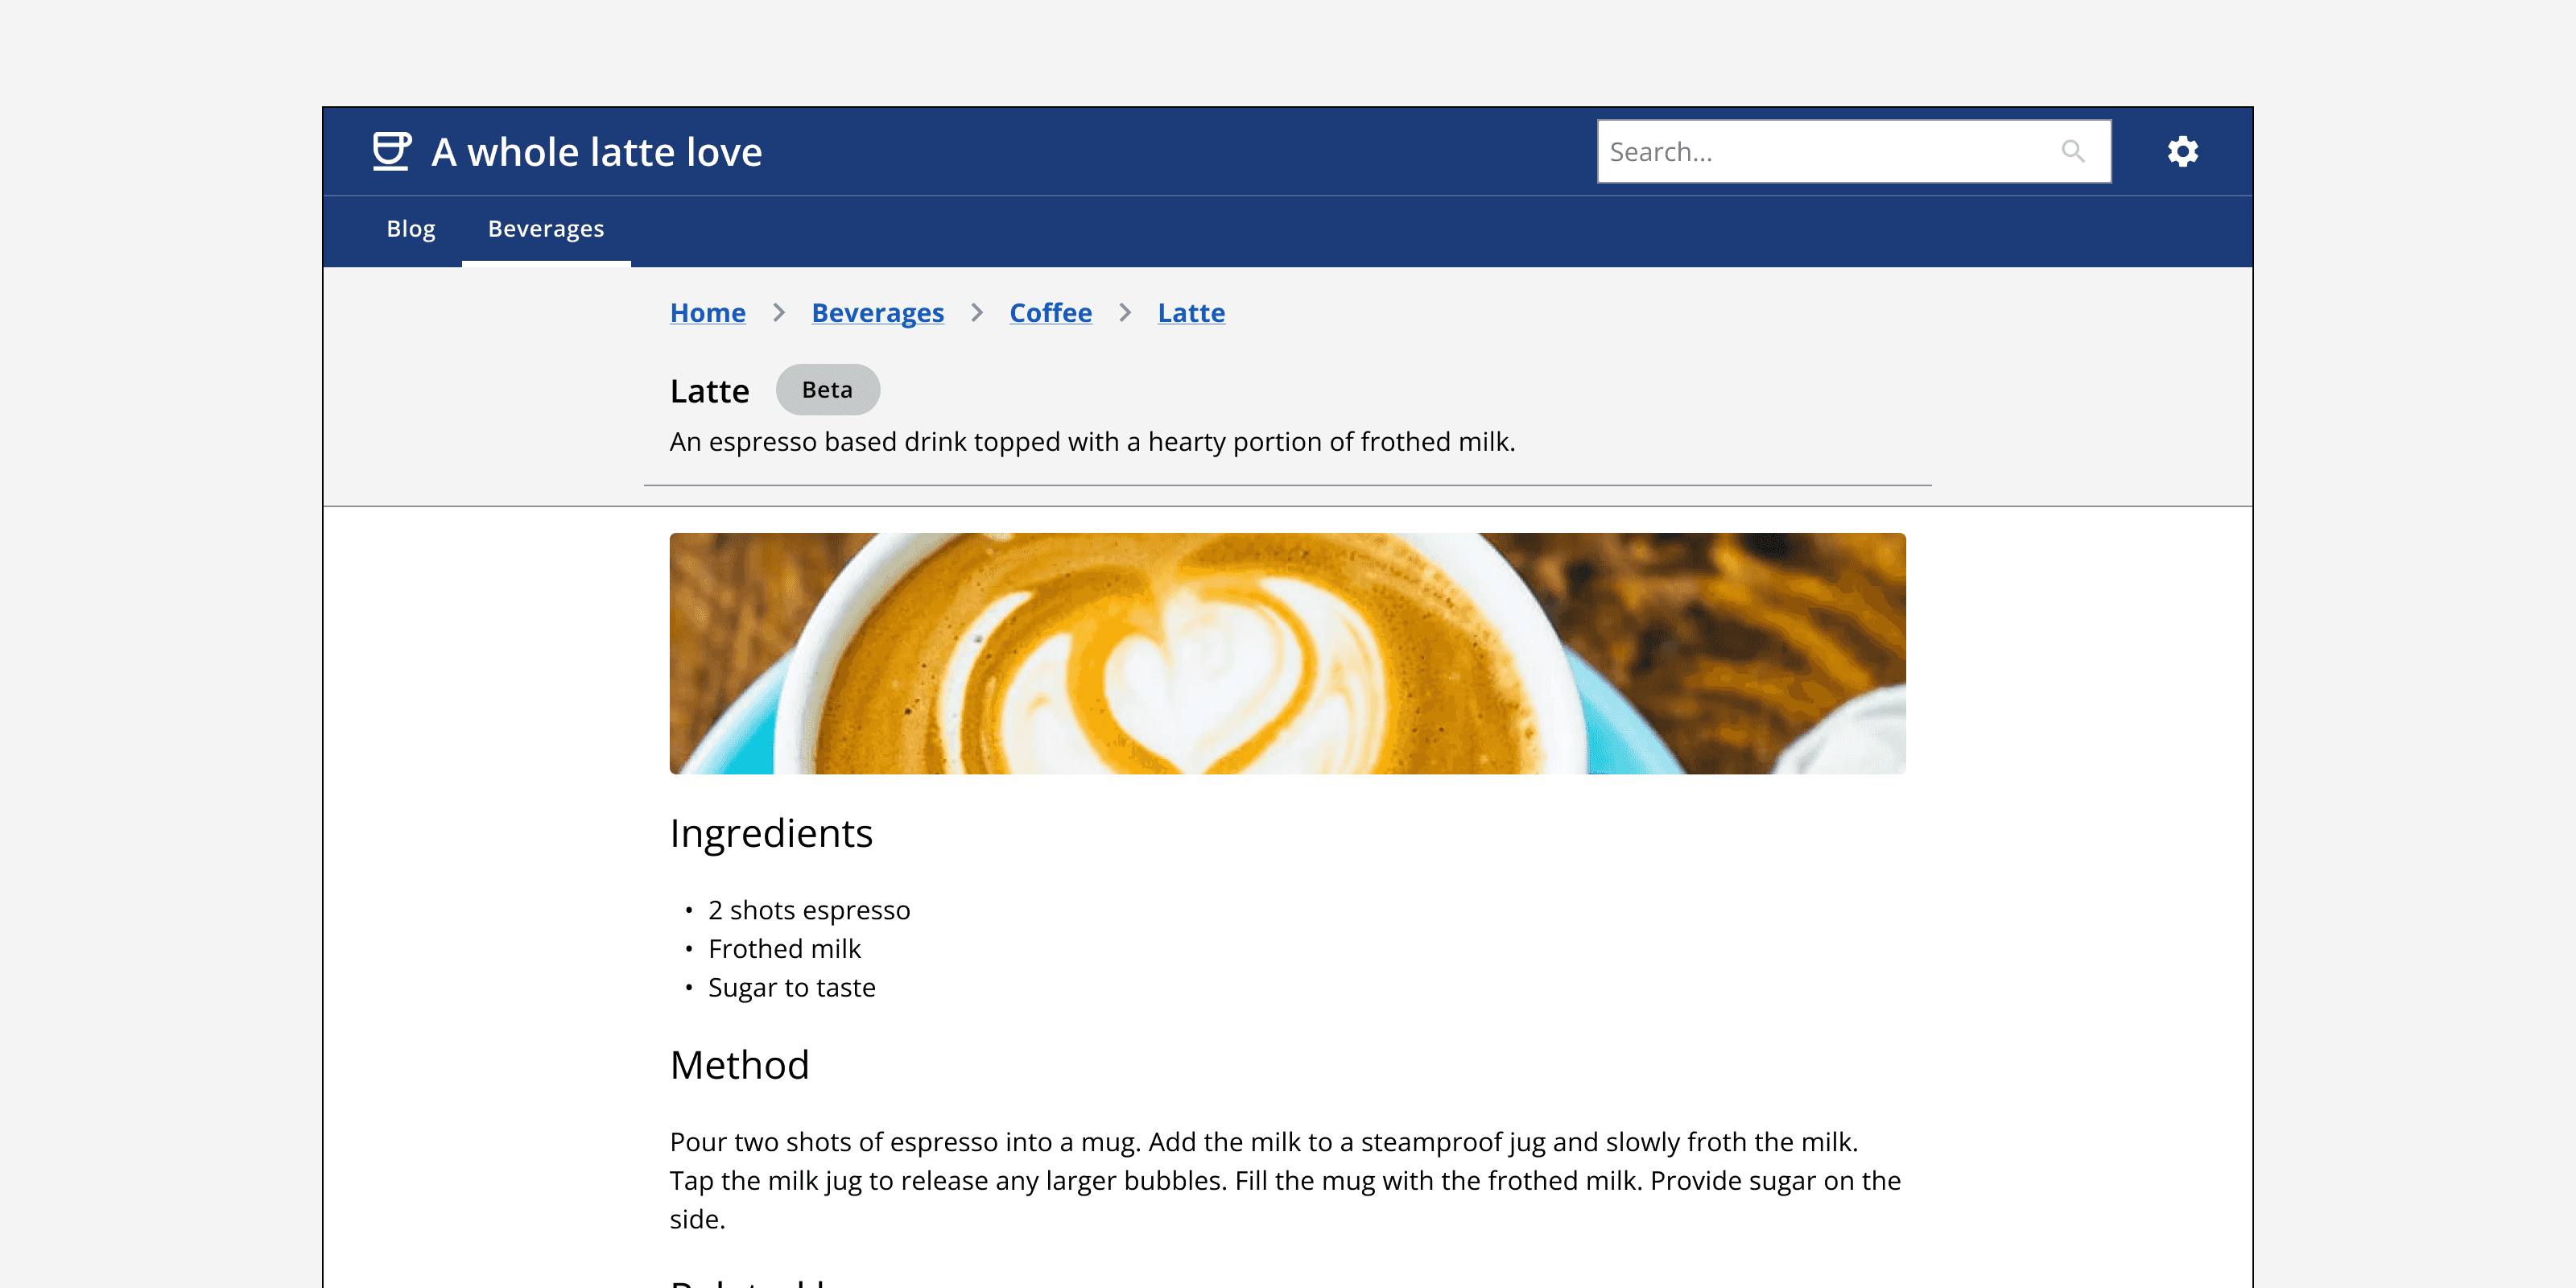 An example app called ‘A whole latte love’ showing a page titled ‘Latte’. A breadcrumb exists in the page header that includes links to the current page ‘Latte’, and its ancestors ‘Coffee’, ‘Beverages’ and ‘Home’.